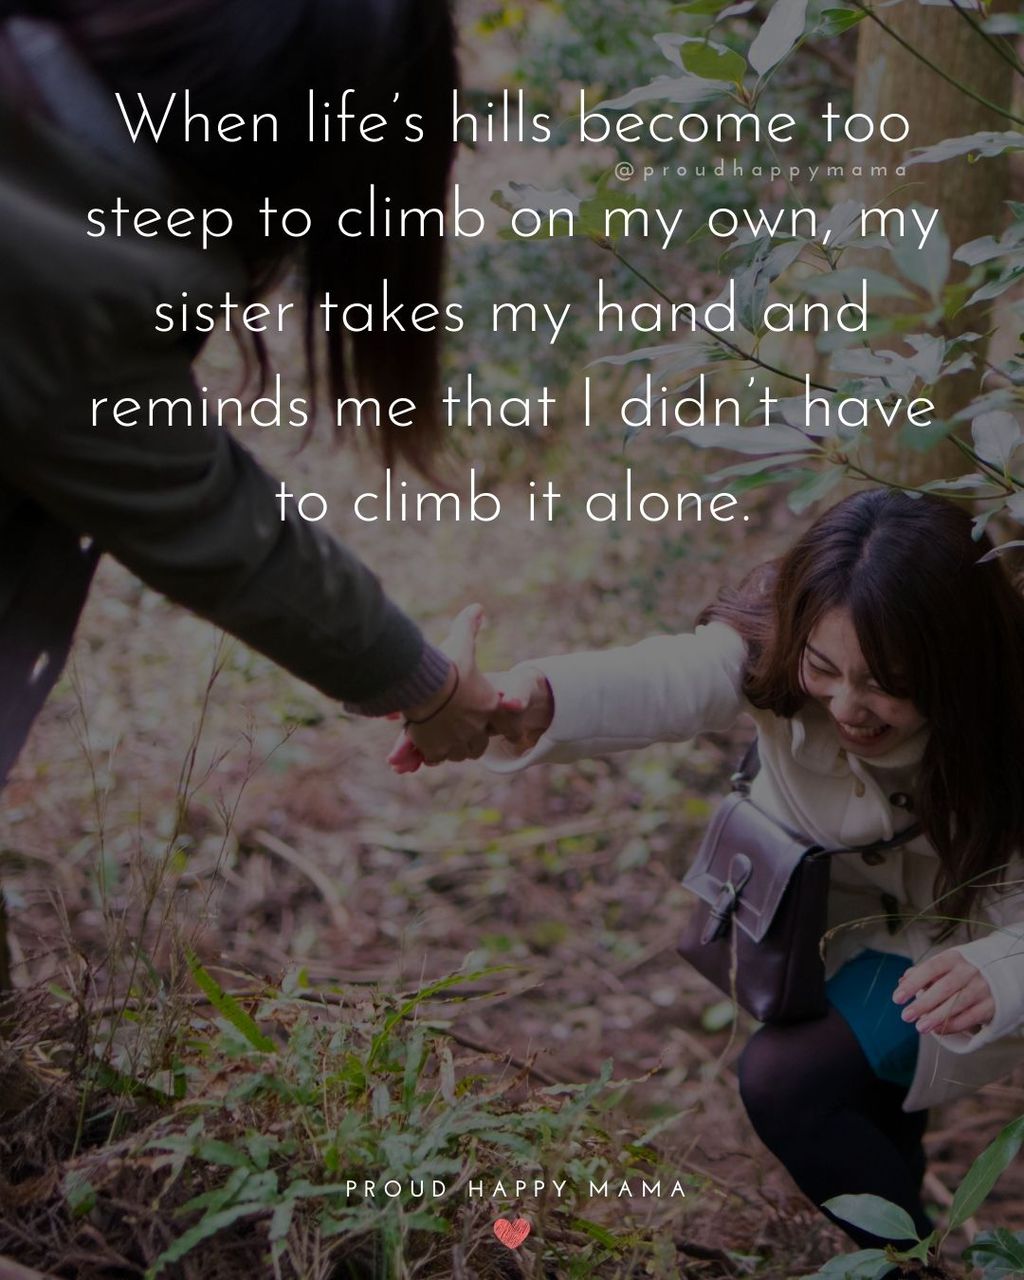 Sister Quotes - When lifes hills become too steep to climb on my own, my sister takes my hand and reminds me that I didnt have to climb it alone.